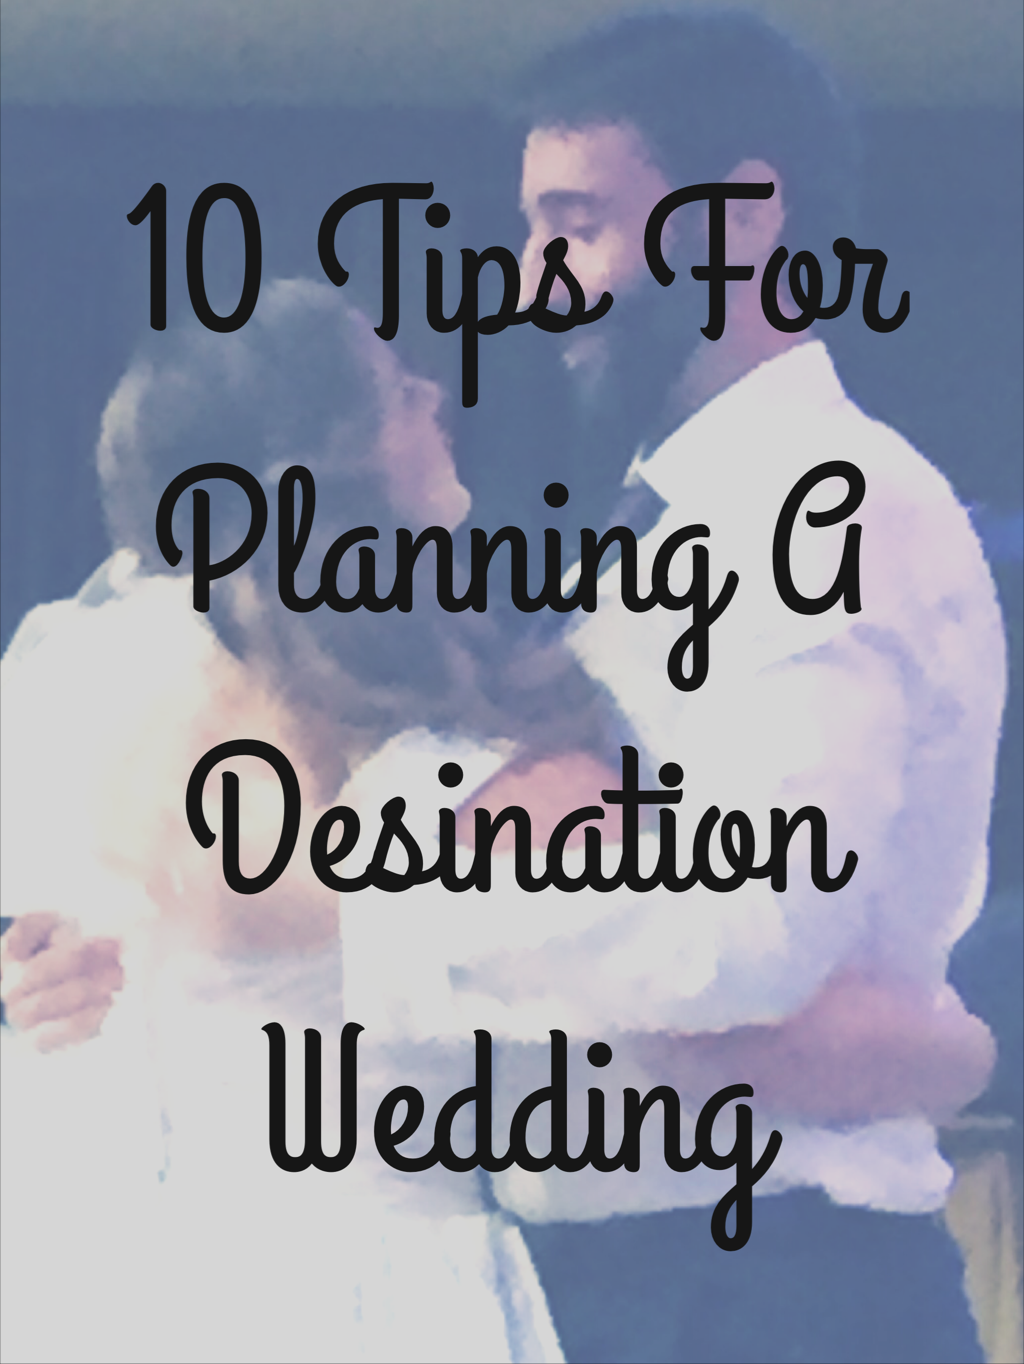 10 Tips For Planning a Destination Wedding - The Pike's Place